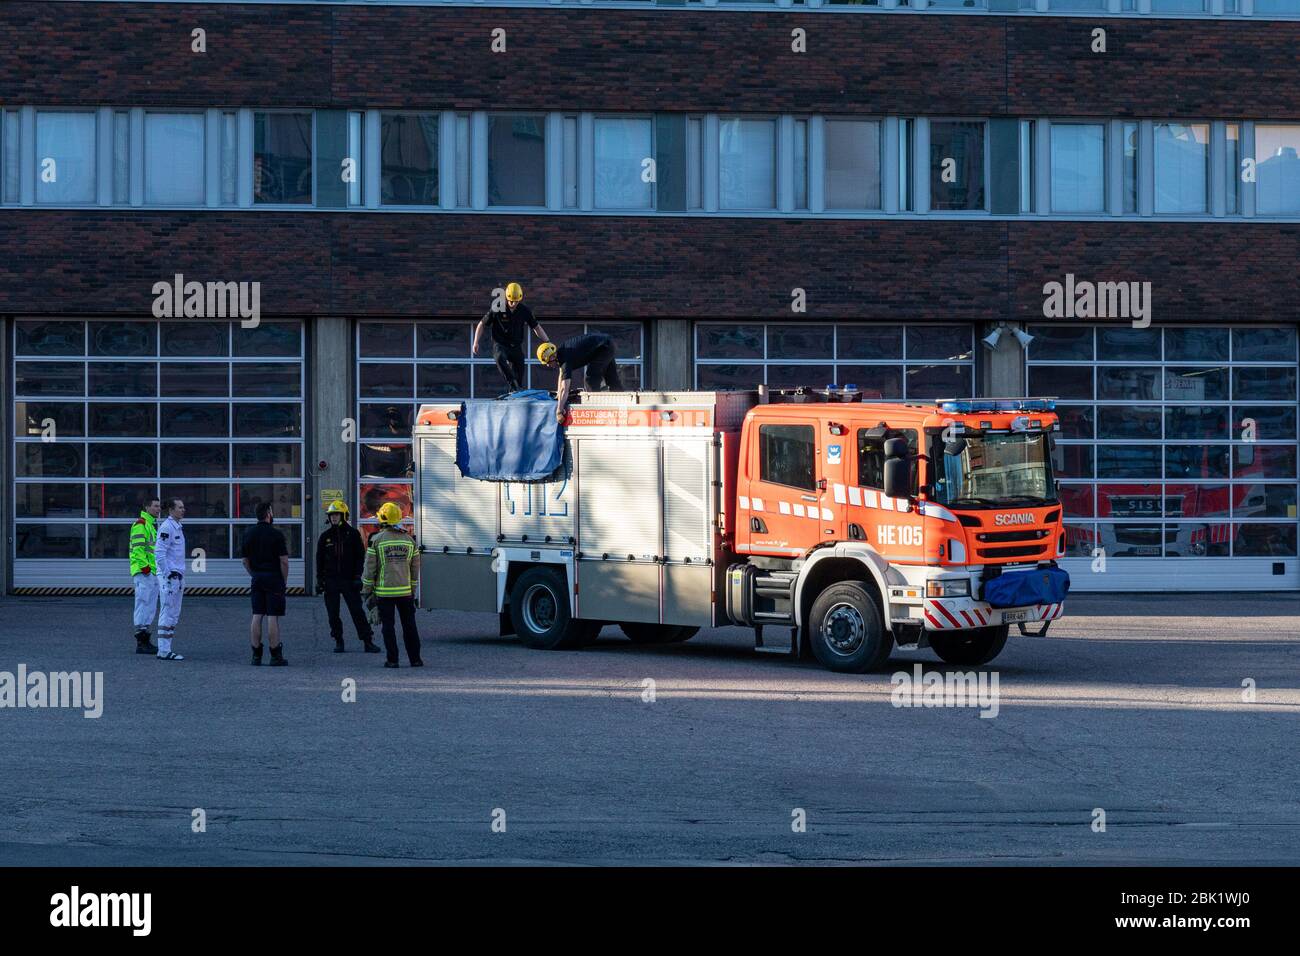 Fire fighters practicing in front of Kallio firestation. Evening sun lights up the fire engine. Helsinki, Finland. Stock Photo